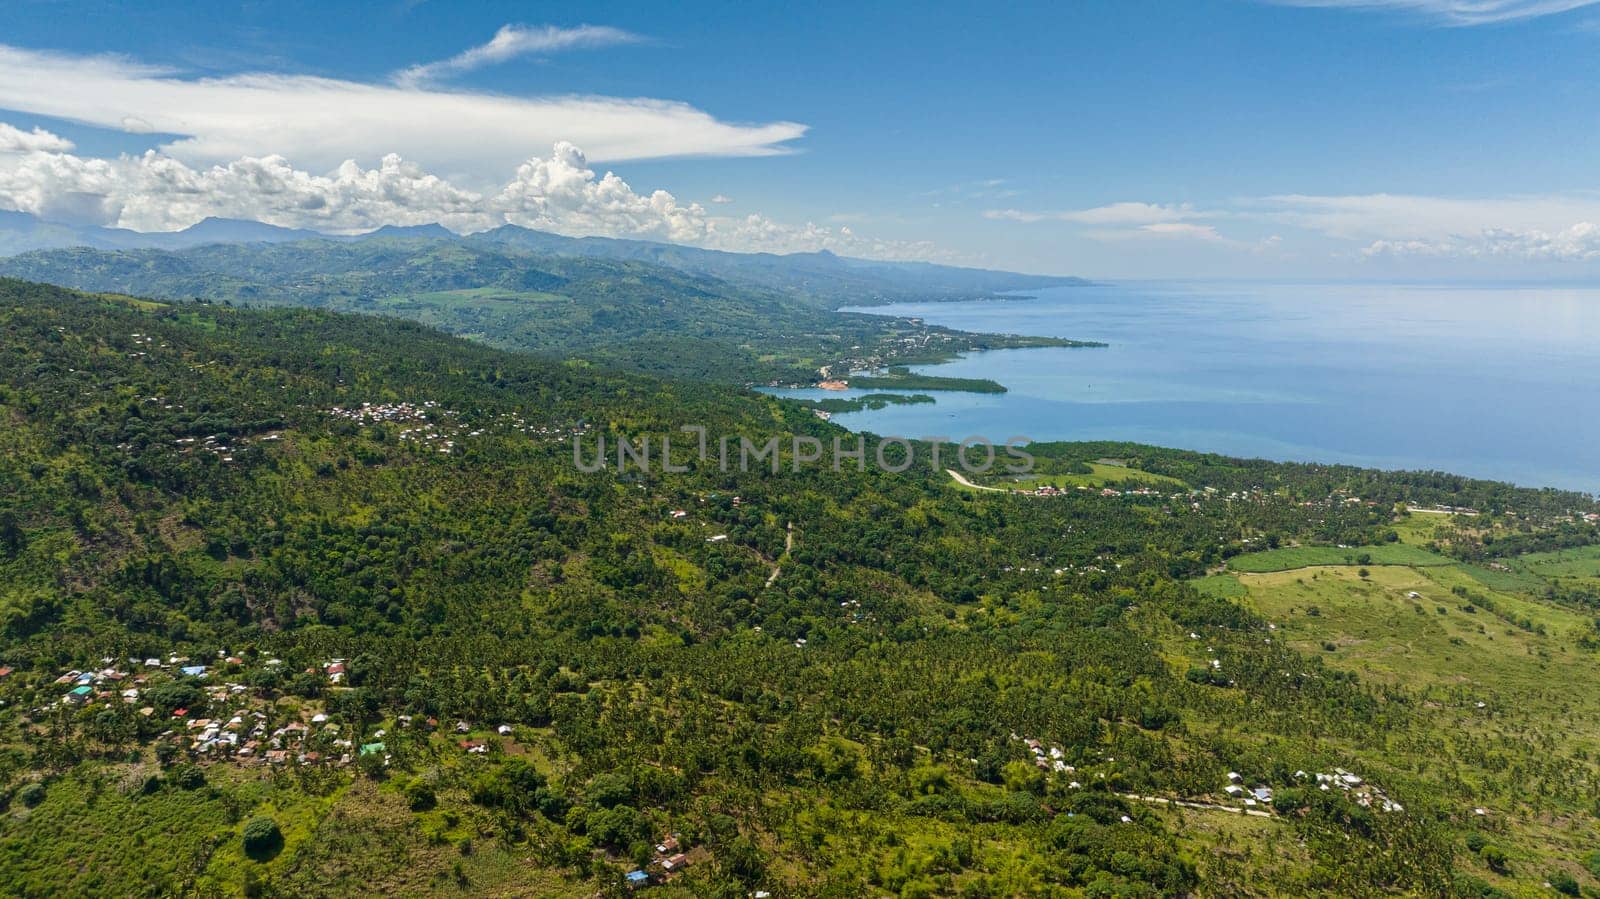 Coastline of Negros Island with towns and villages. Philippines.